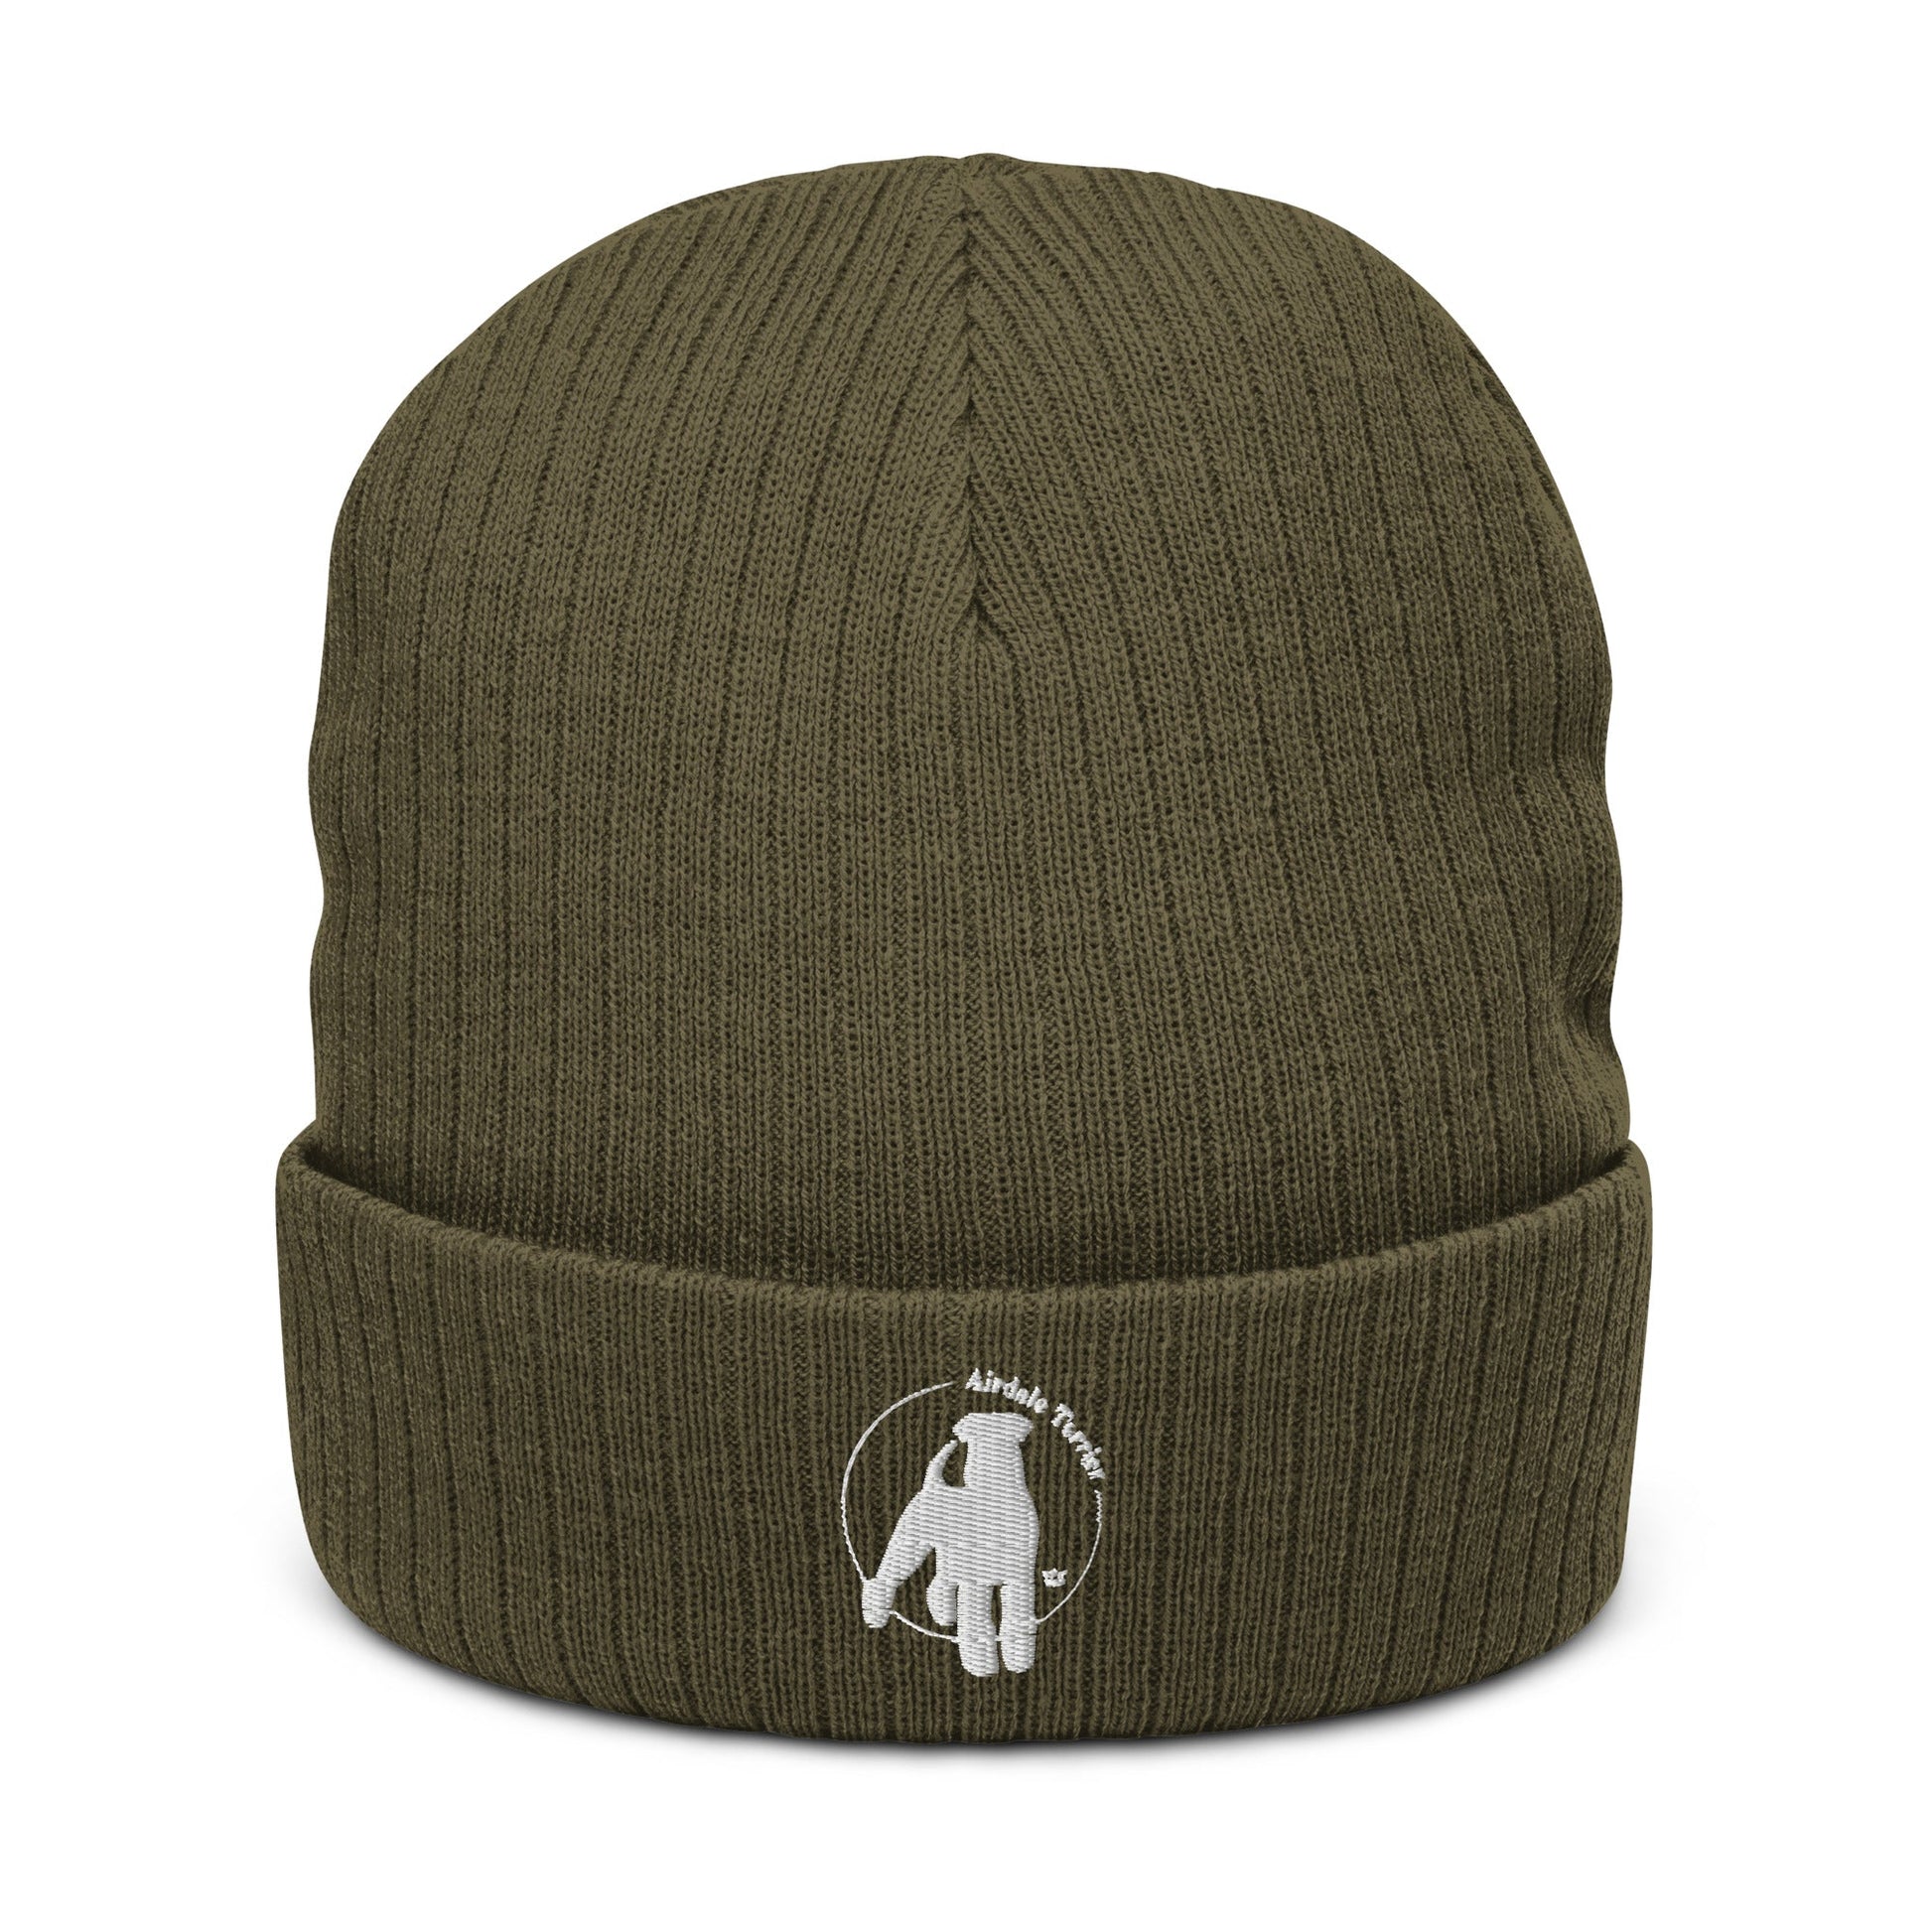 Ribbed Knit Beanie Featuring Embroidered Airedale Terrier Logo - Hobbster